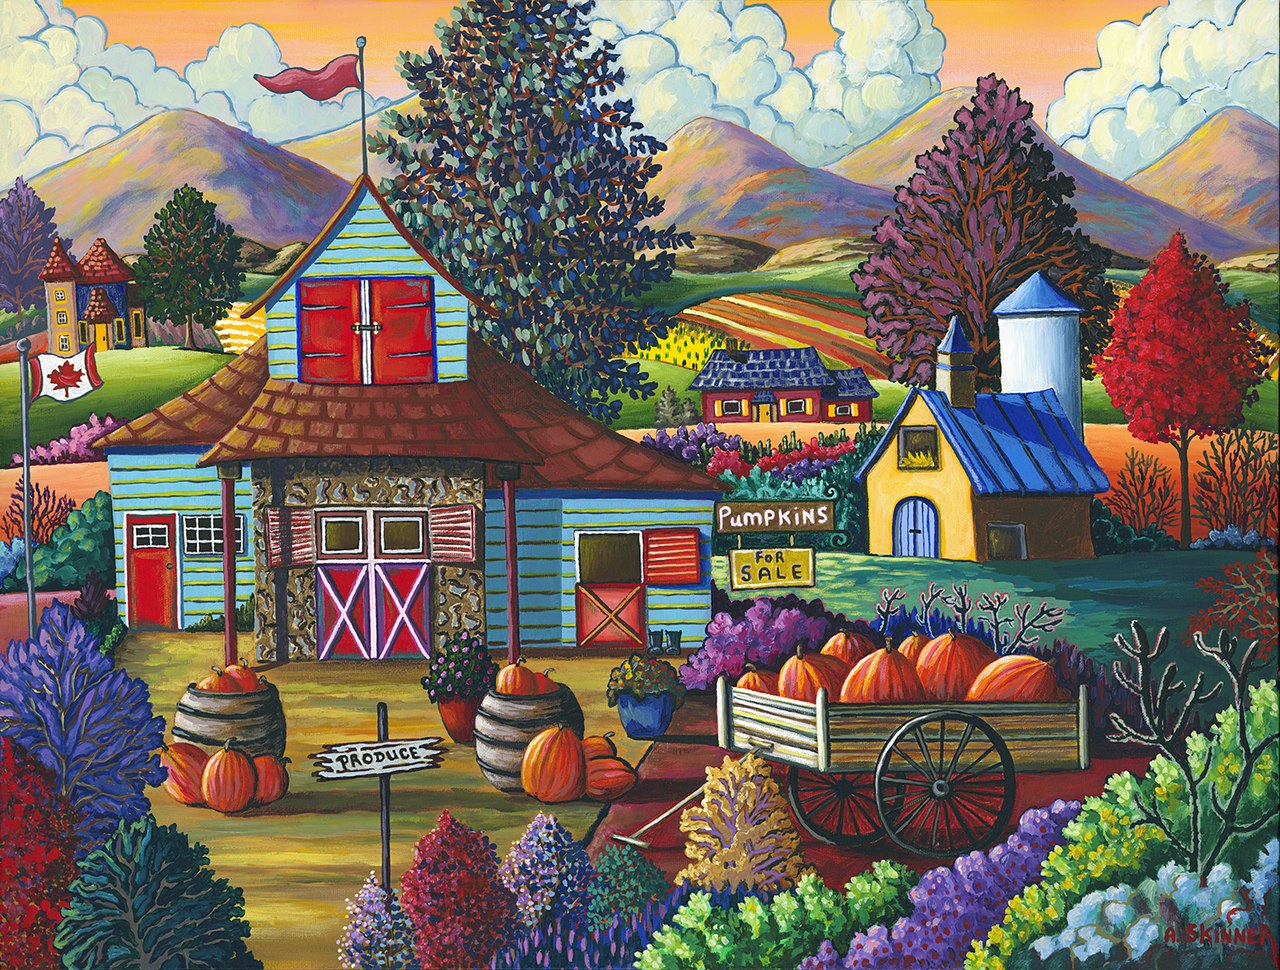 Skinner: Country Pumpkins for Sale - 750pc Jigsaw Puzzle By Standout Puzzles  			  					NEW